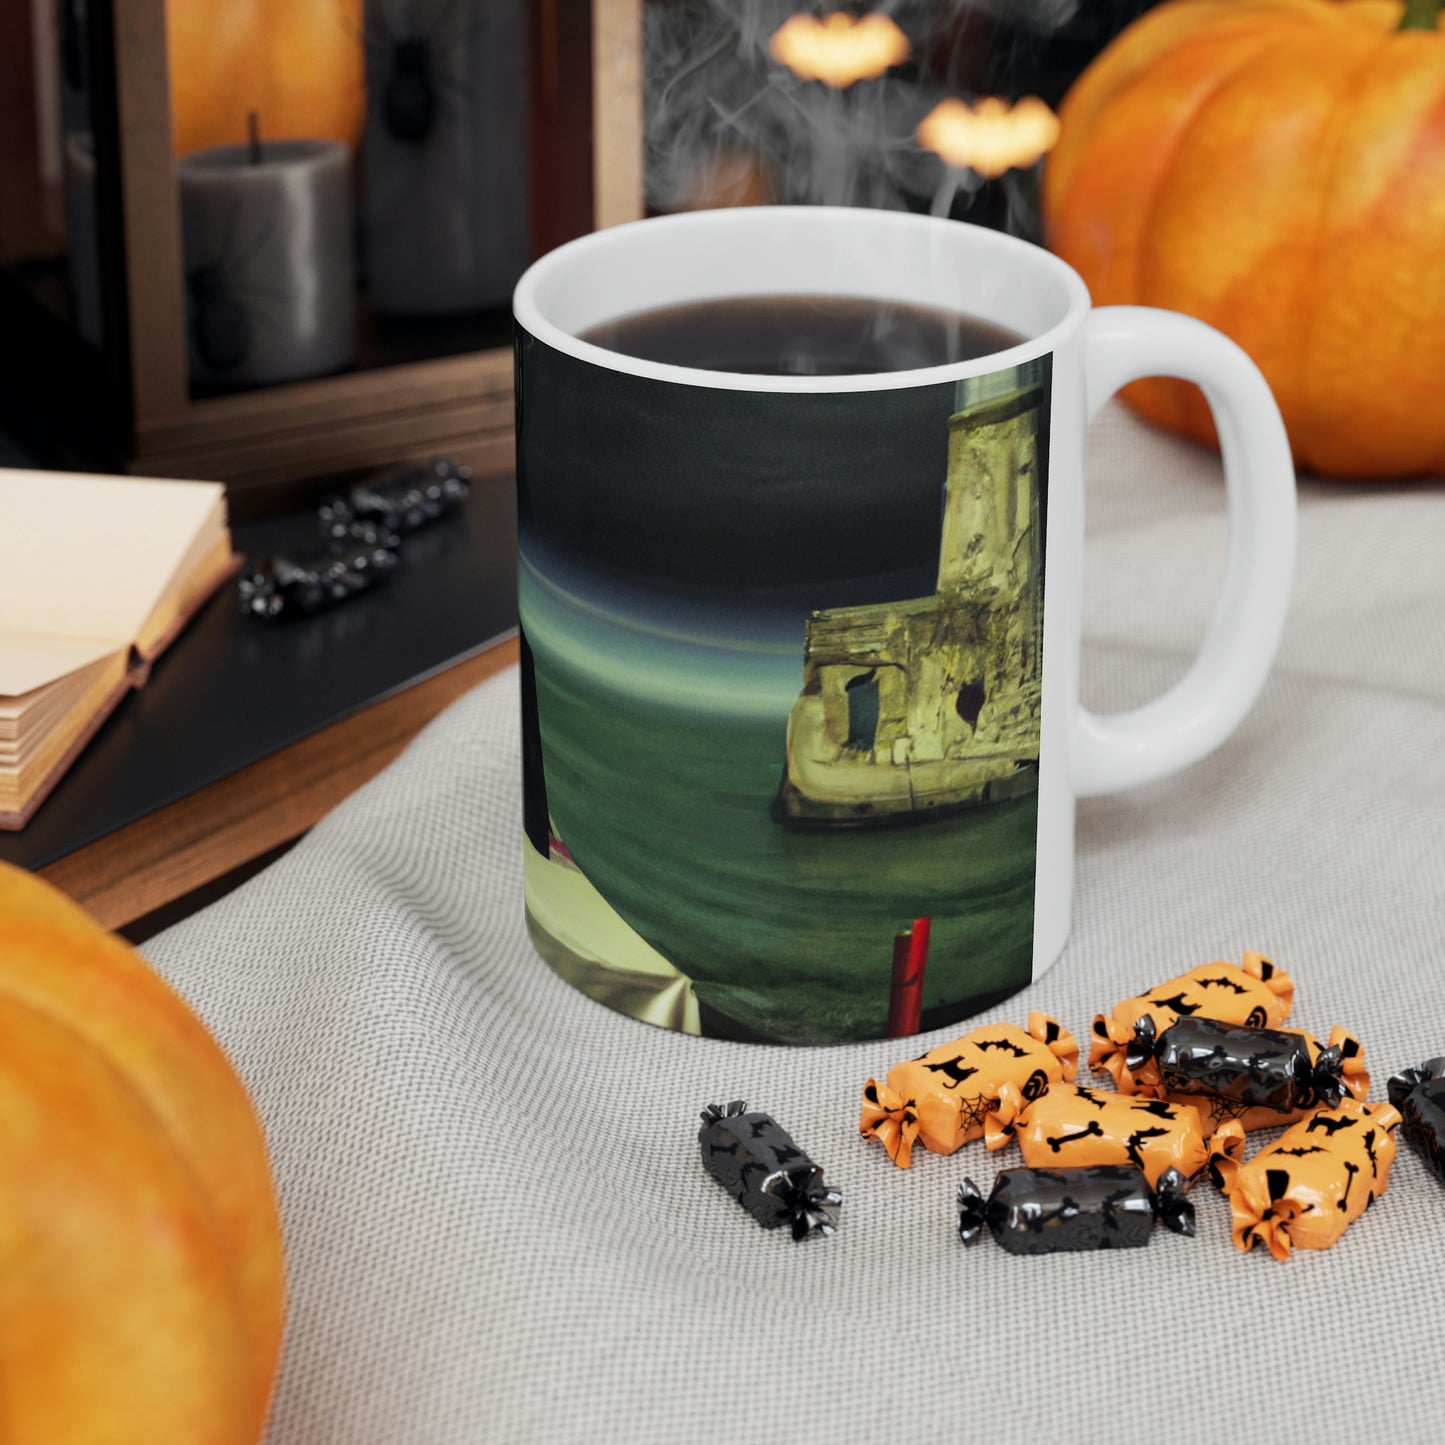 "A Beacon of Romance: An Intimate Candlelight Dinner in a Forgotten Lighthouse" - The Alien Ceramic Mug 11 oz